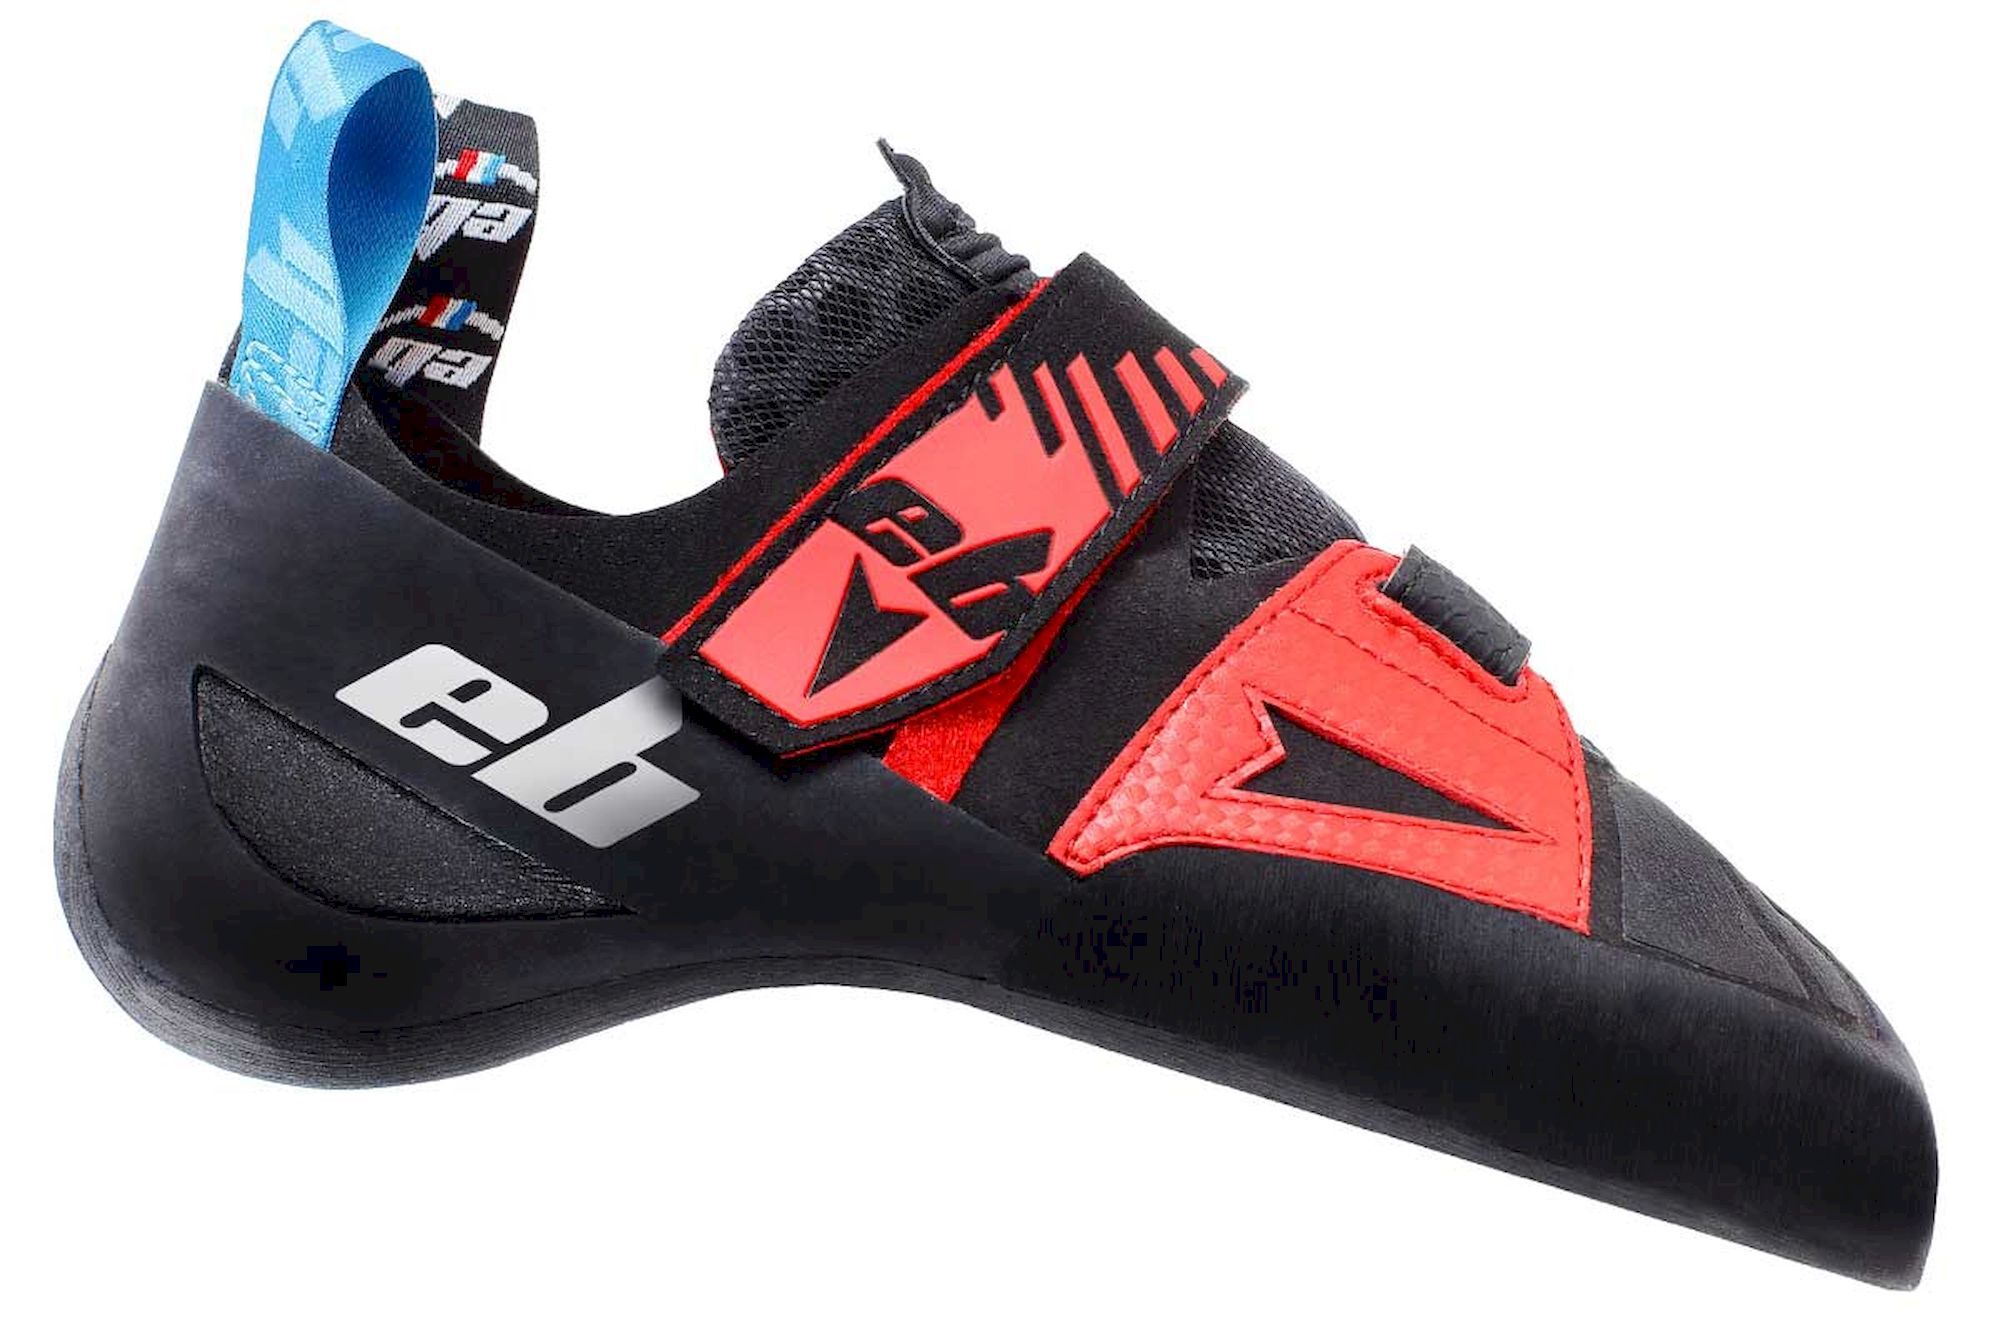 EB Red - Climbing shoes | Hardloop